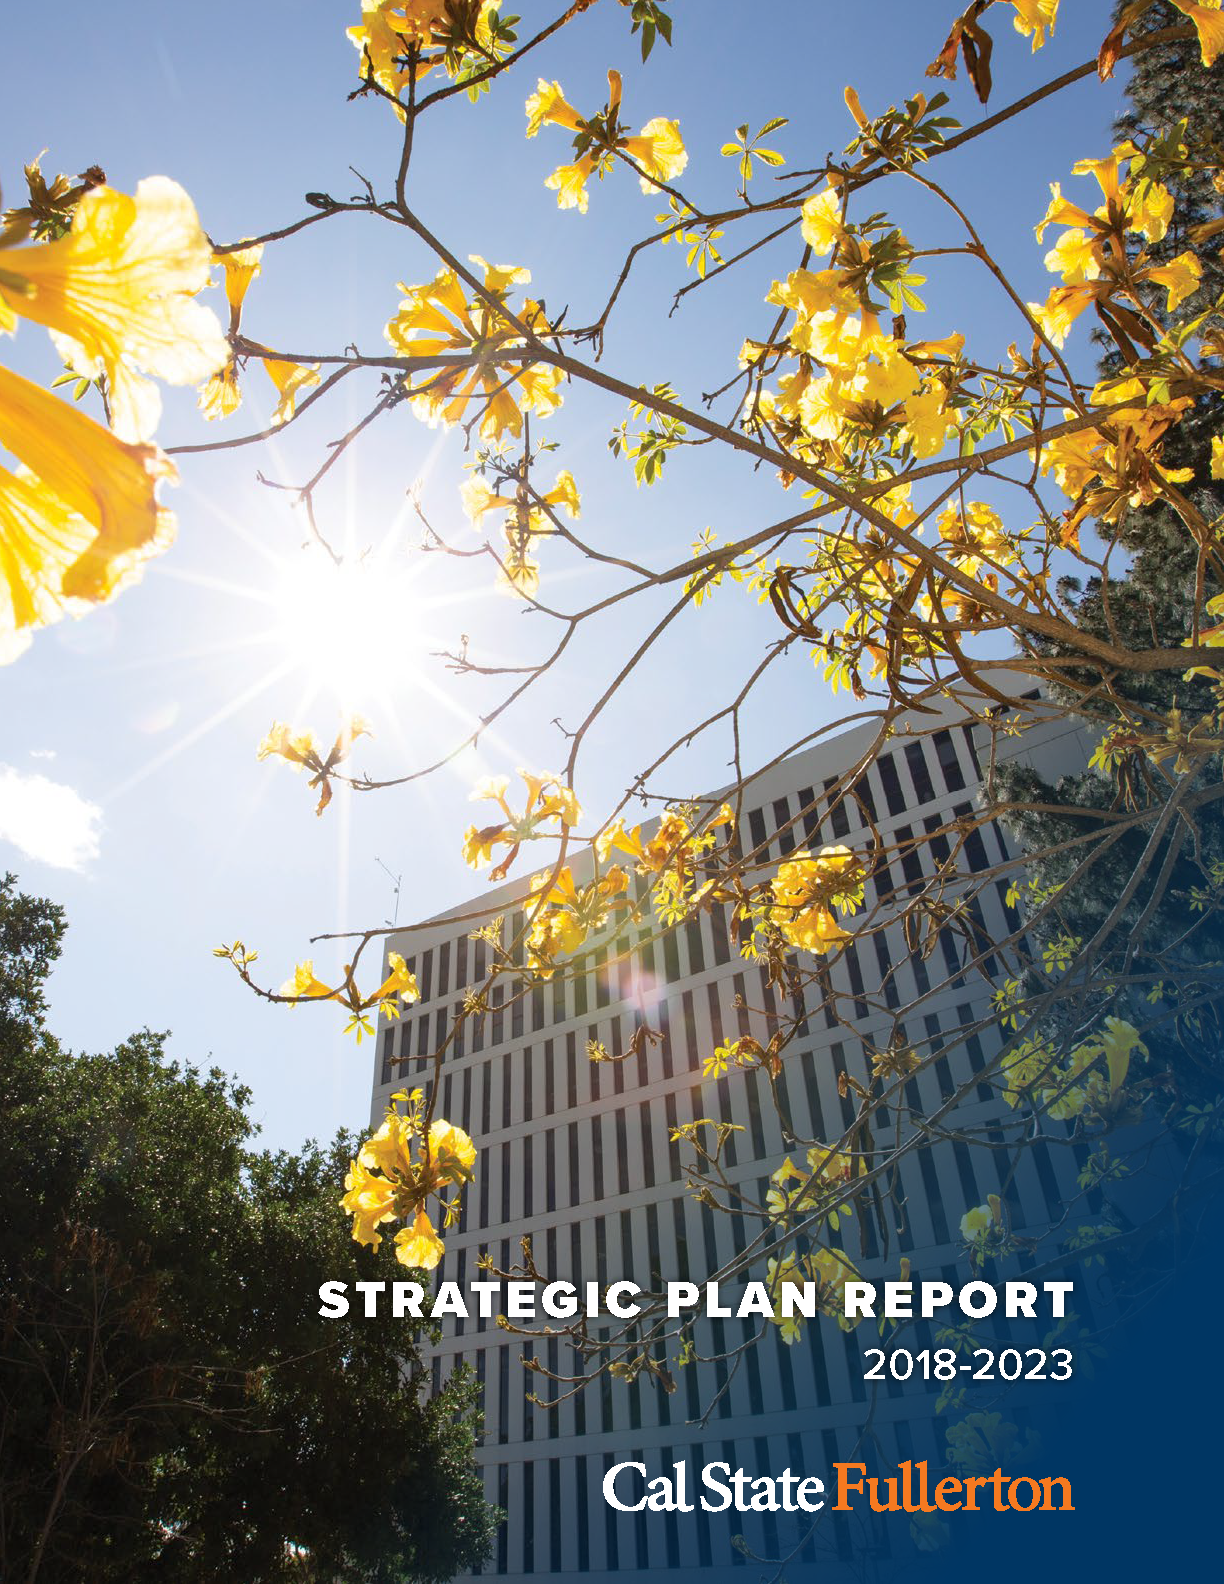 Strategic Plan Report cover, mccarthy hall behind yellow flowers